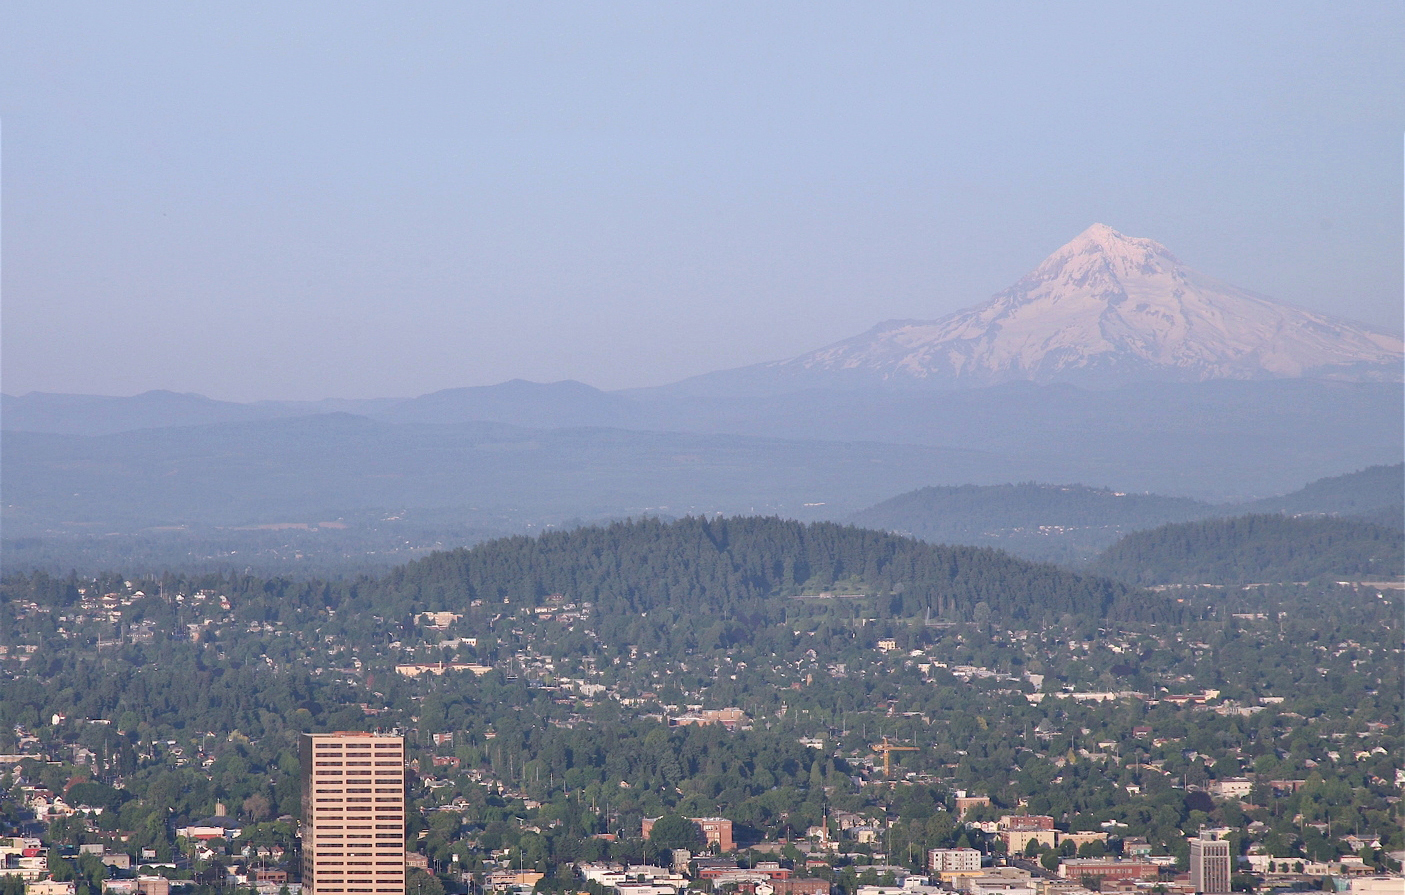 Mount Hood looms over the Portland cityscape.